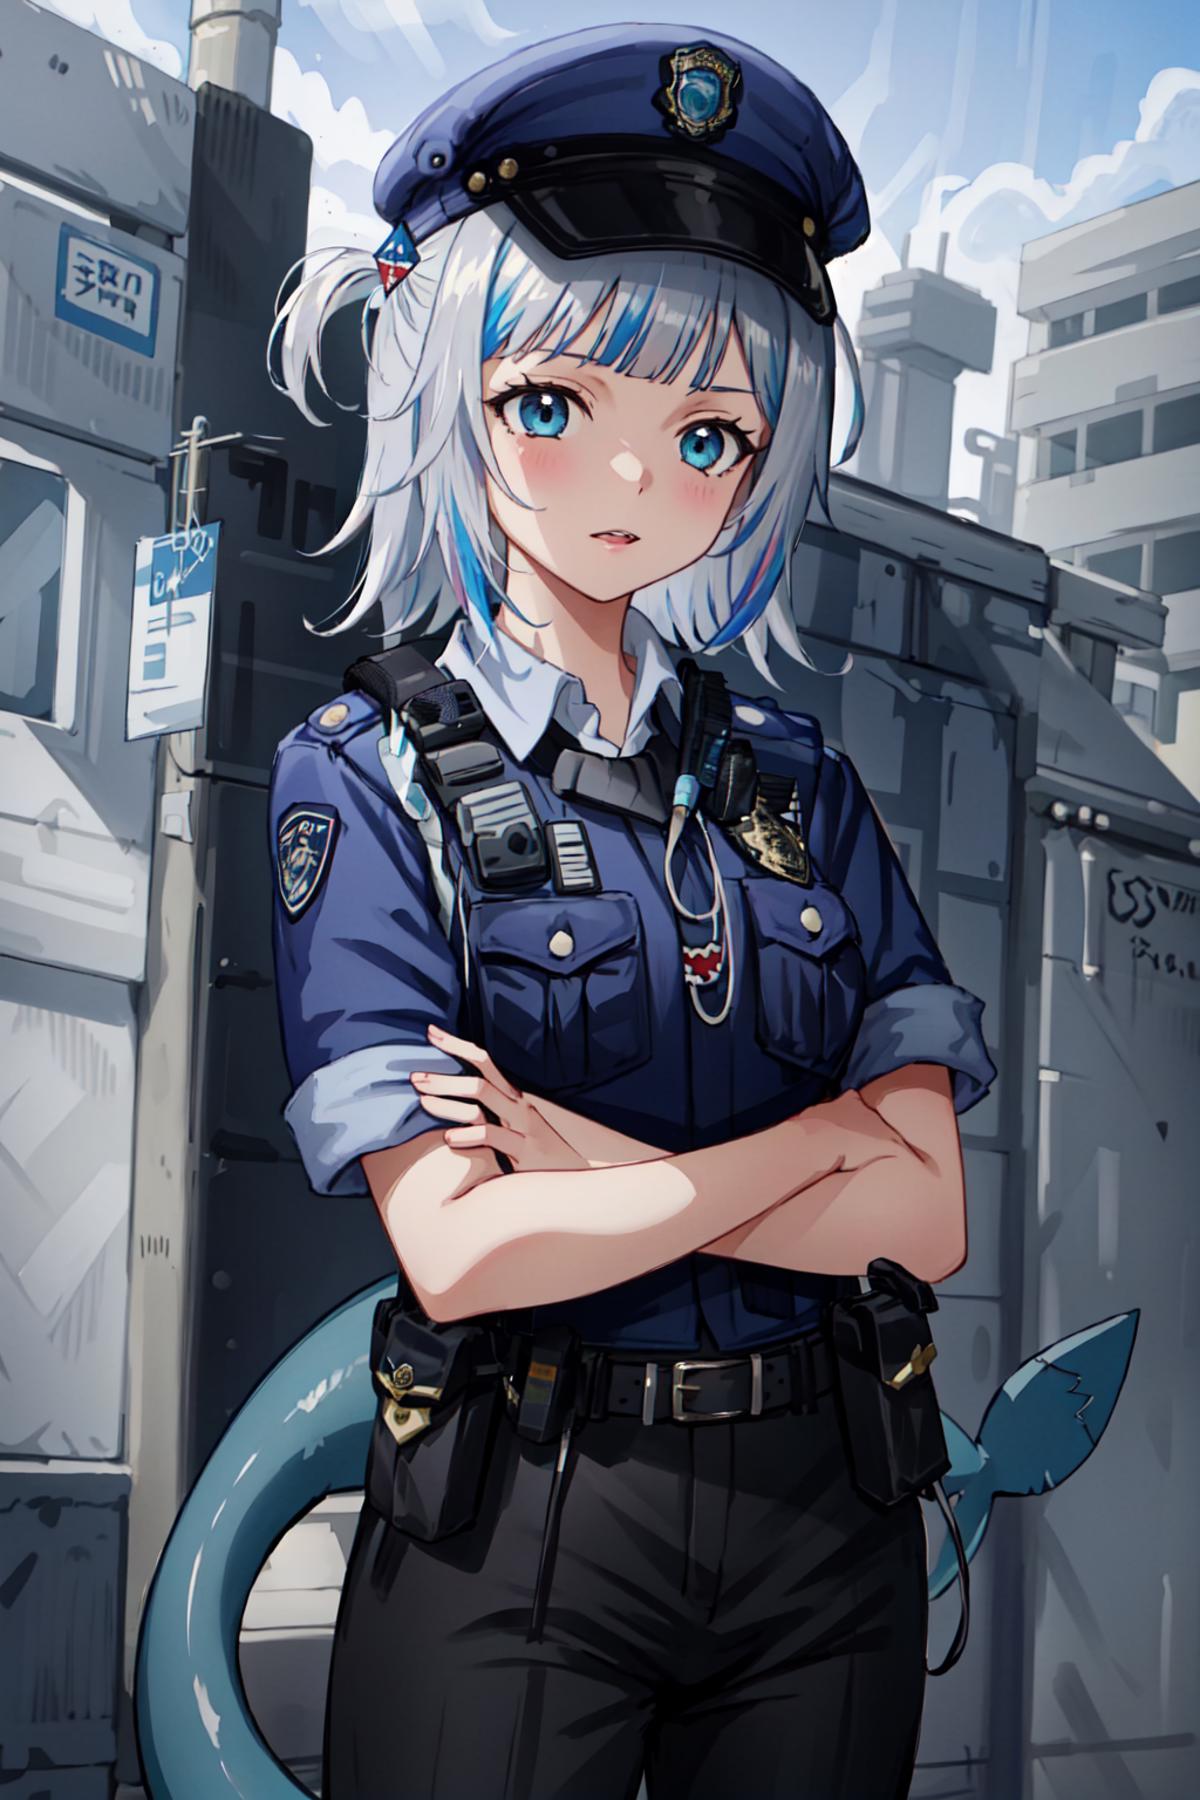 Change-A-Character: Good Cop, Your Waifu Upholds The Law! image by PettankoPaizuri